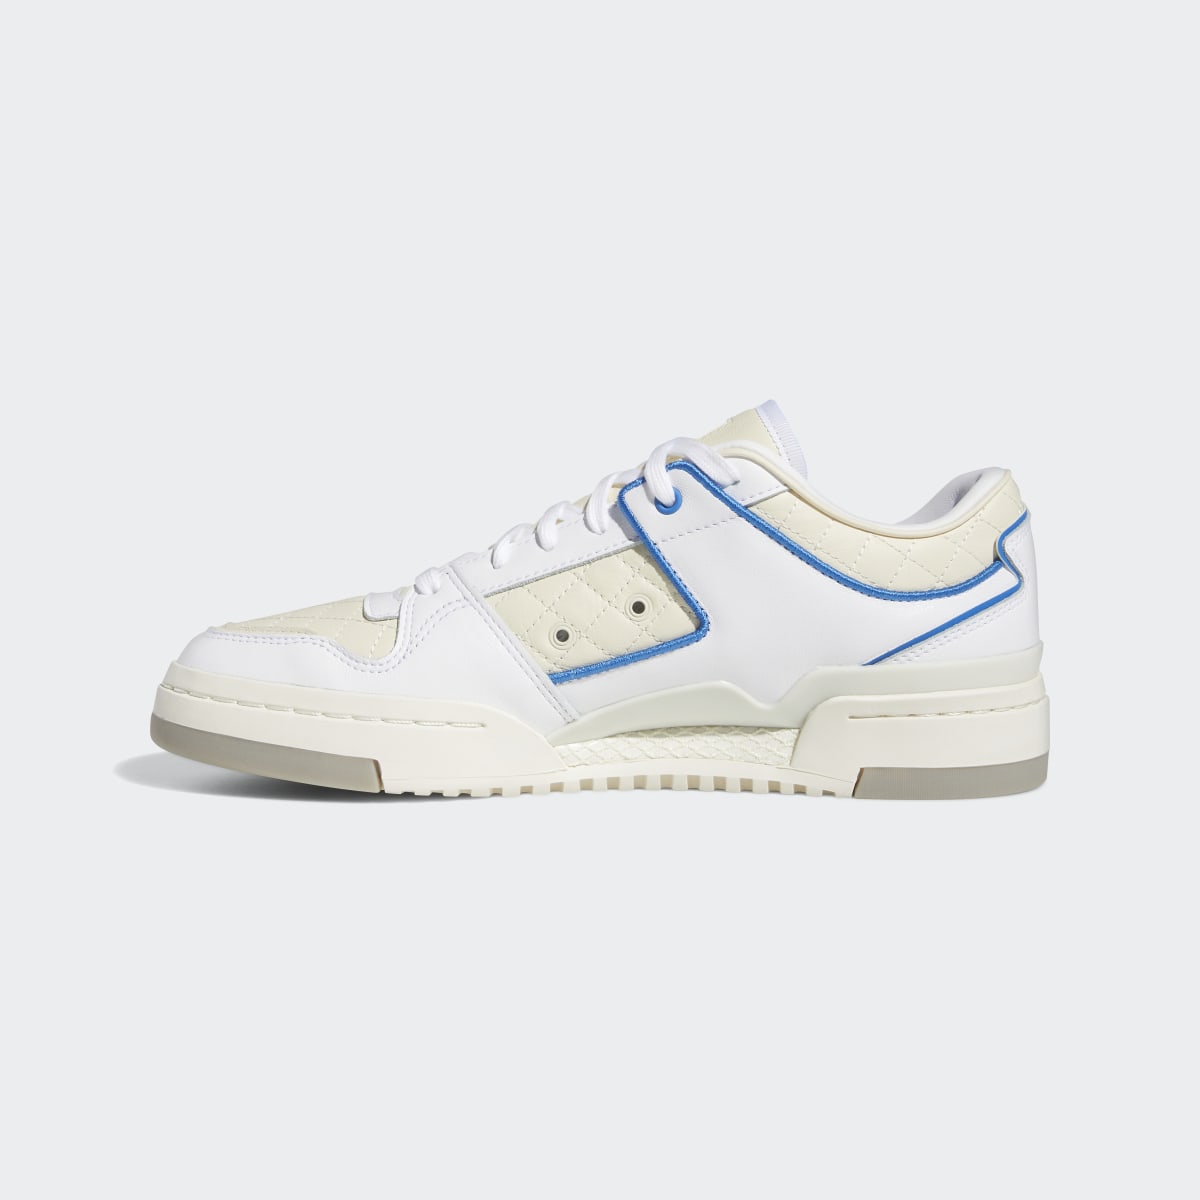 Adidas Forum Luxe Low Shoes. 7